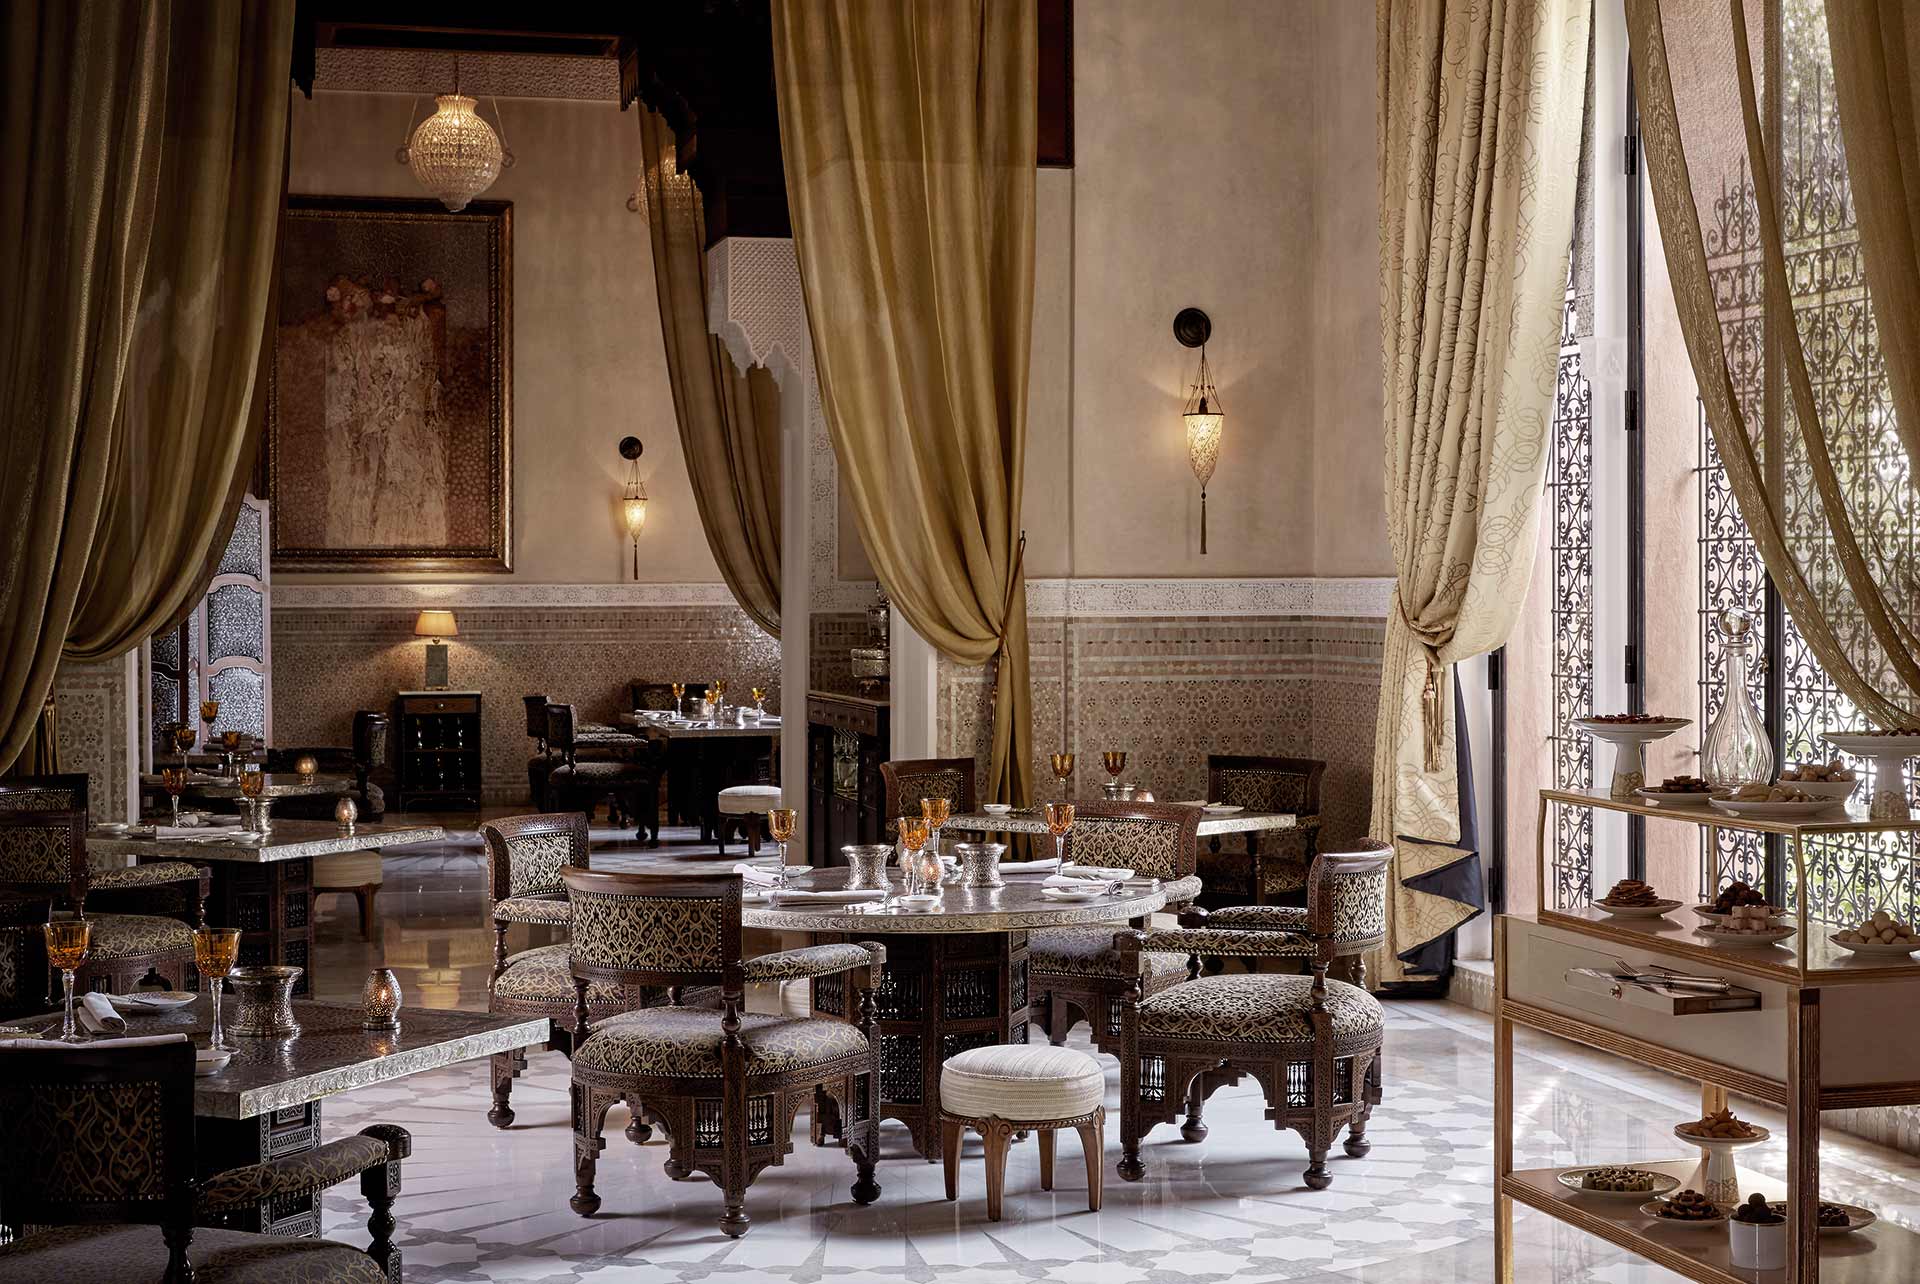 For fine dining there are few places that equal La Grande Table Marocaine